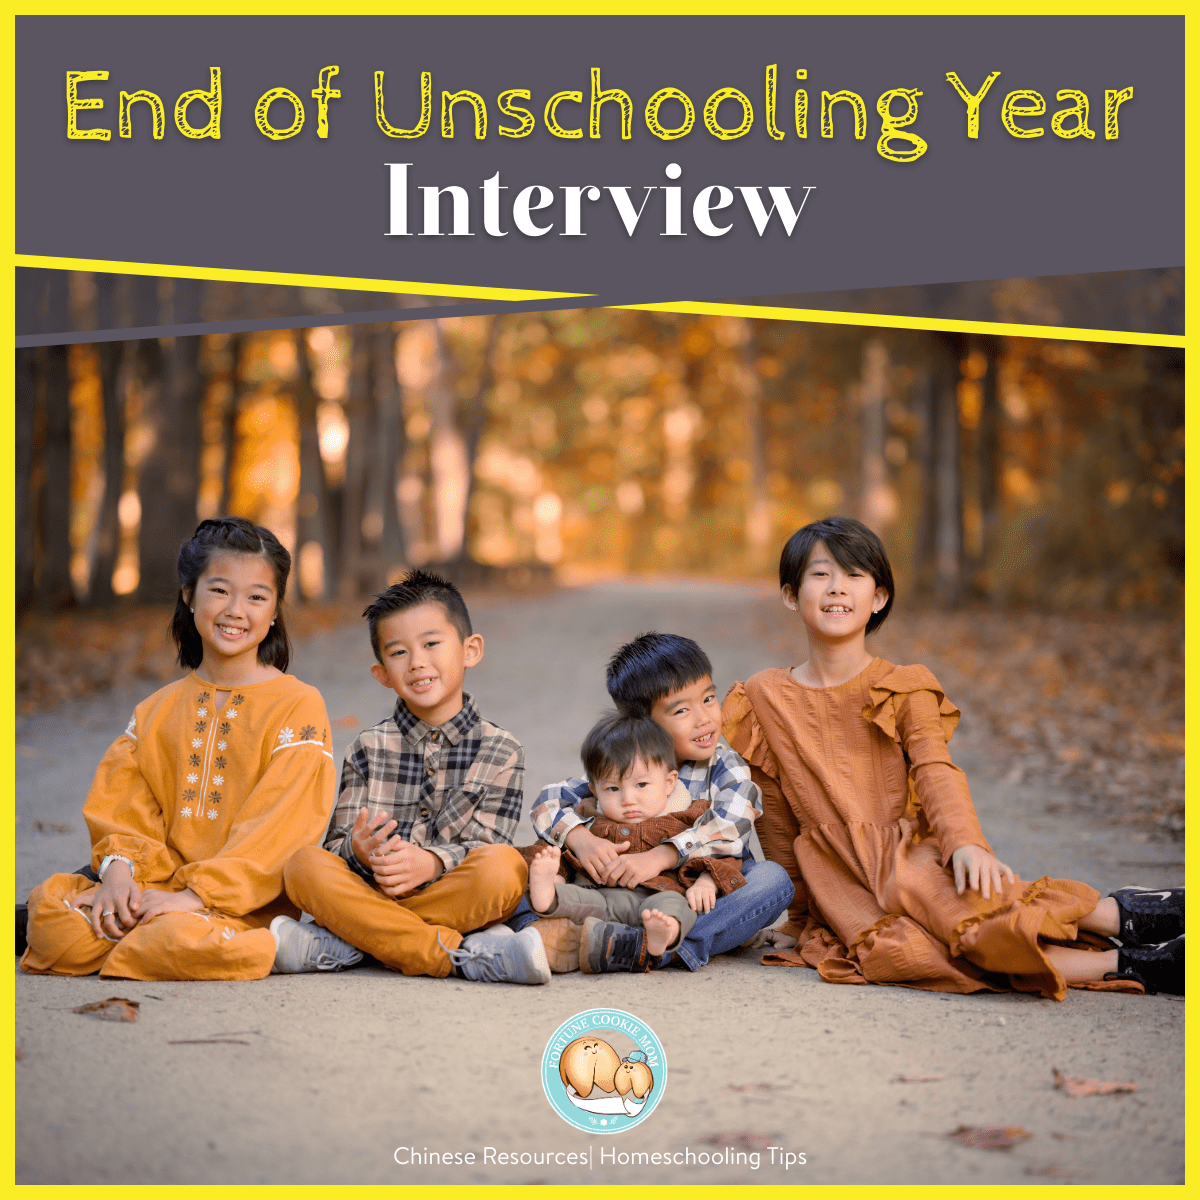 End of Unschooling Year Interview